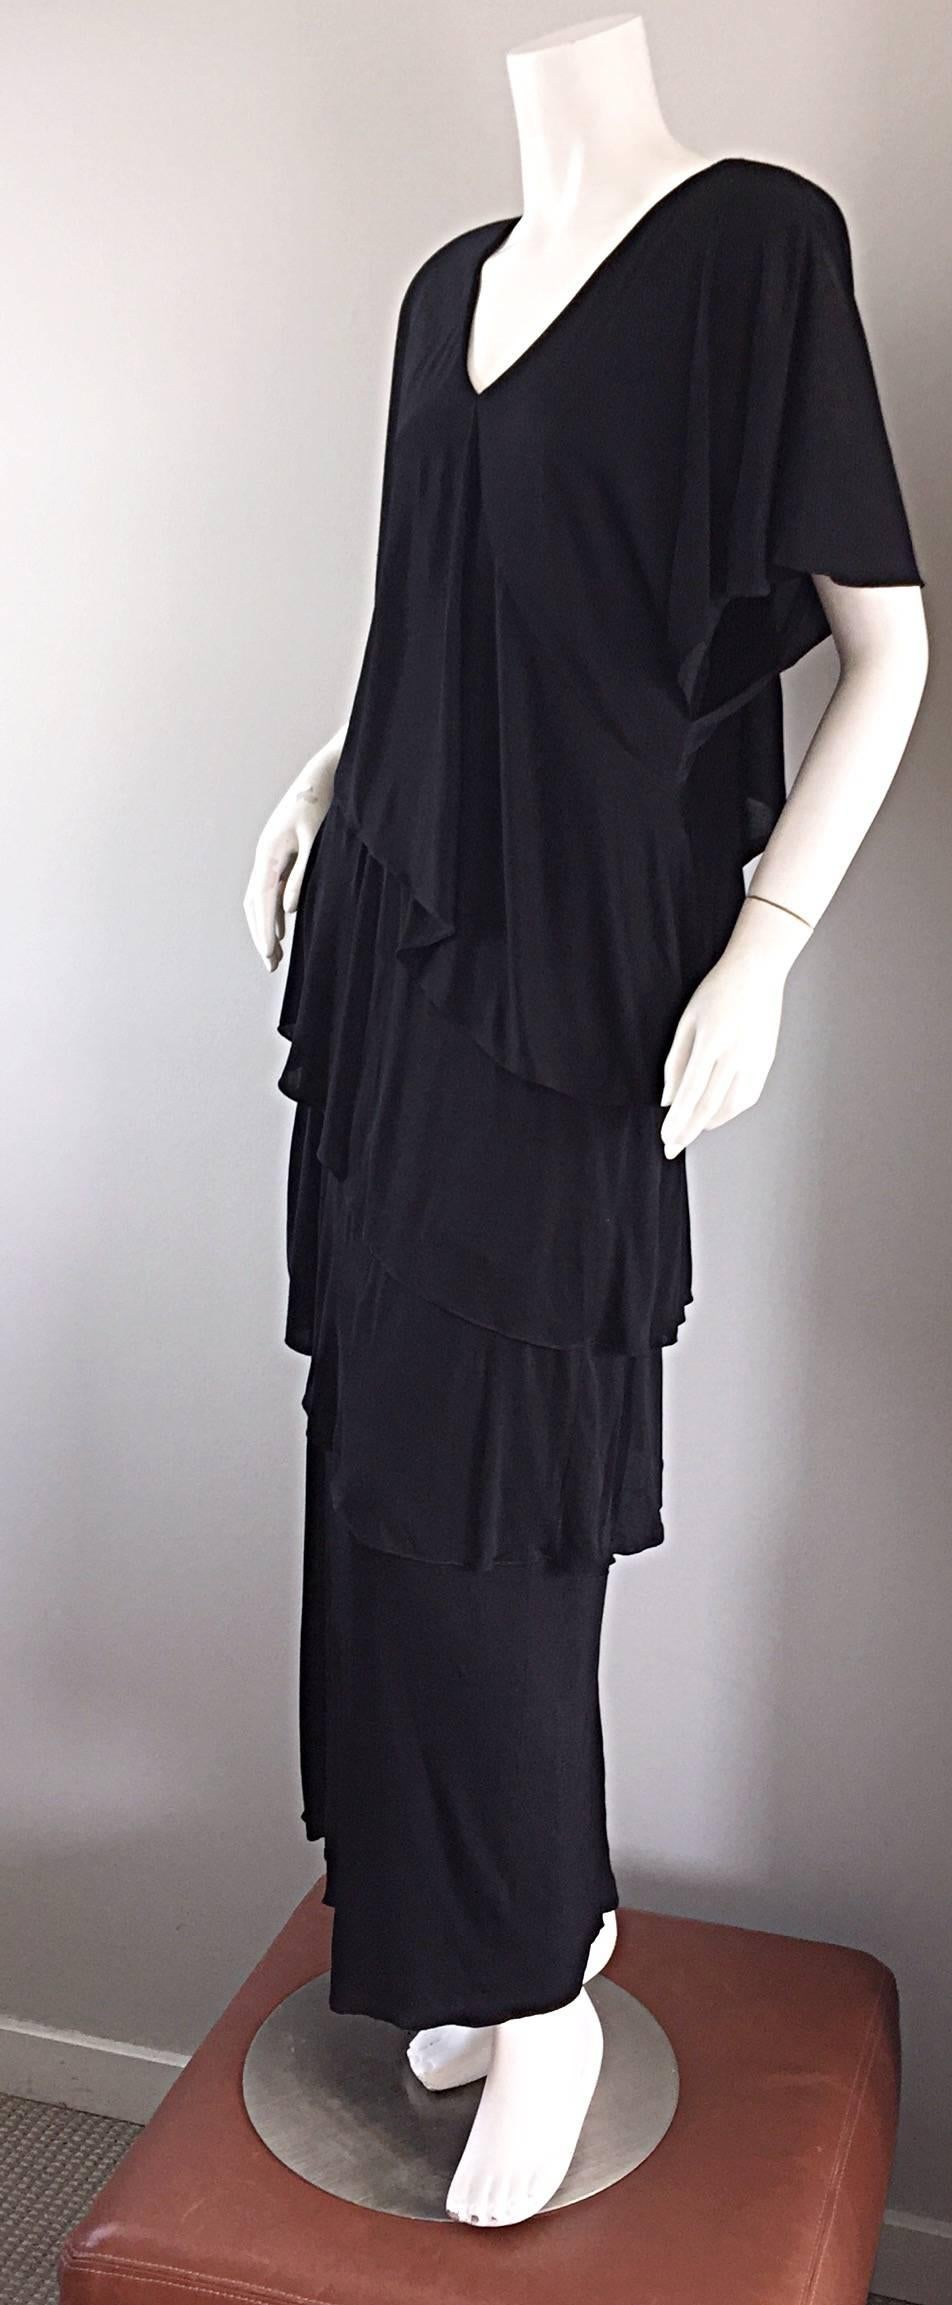 Women's Vintage Holly's Harp Black Silk Jersey Signature Tiered Layered Boho Dress Gown